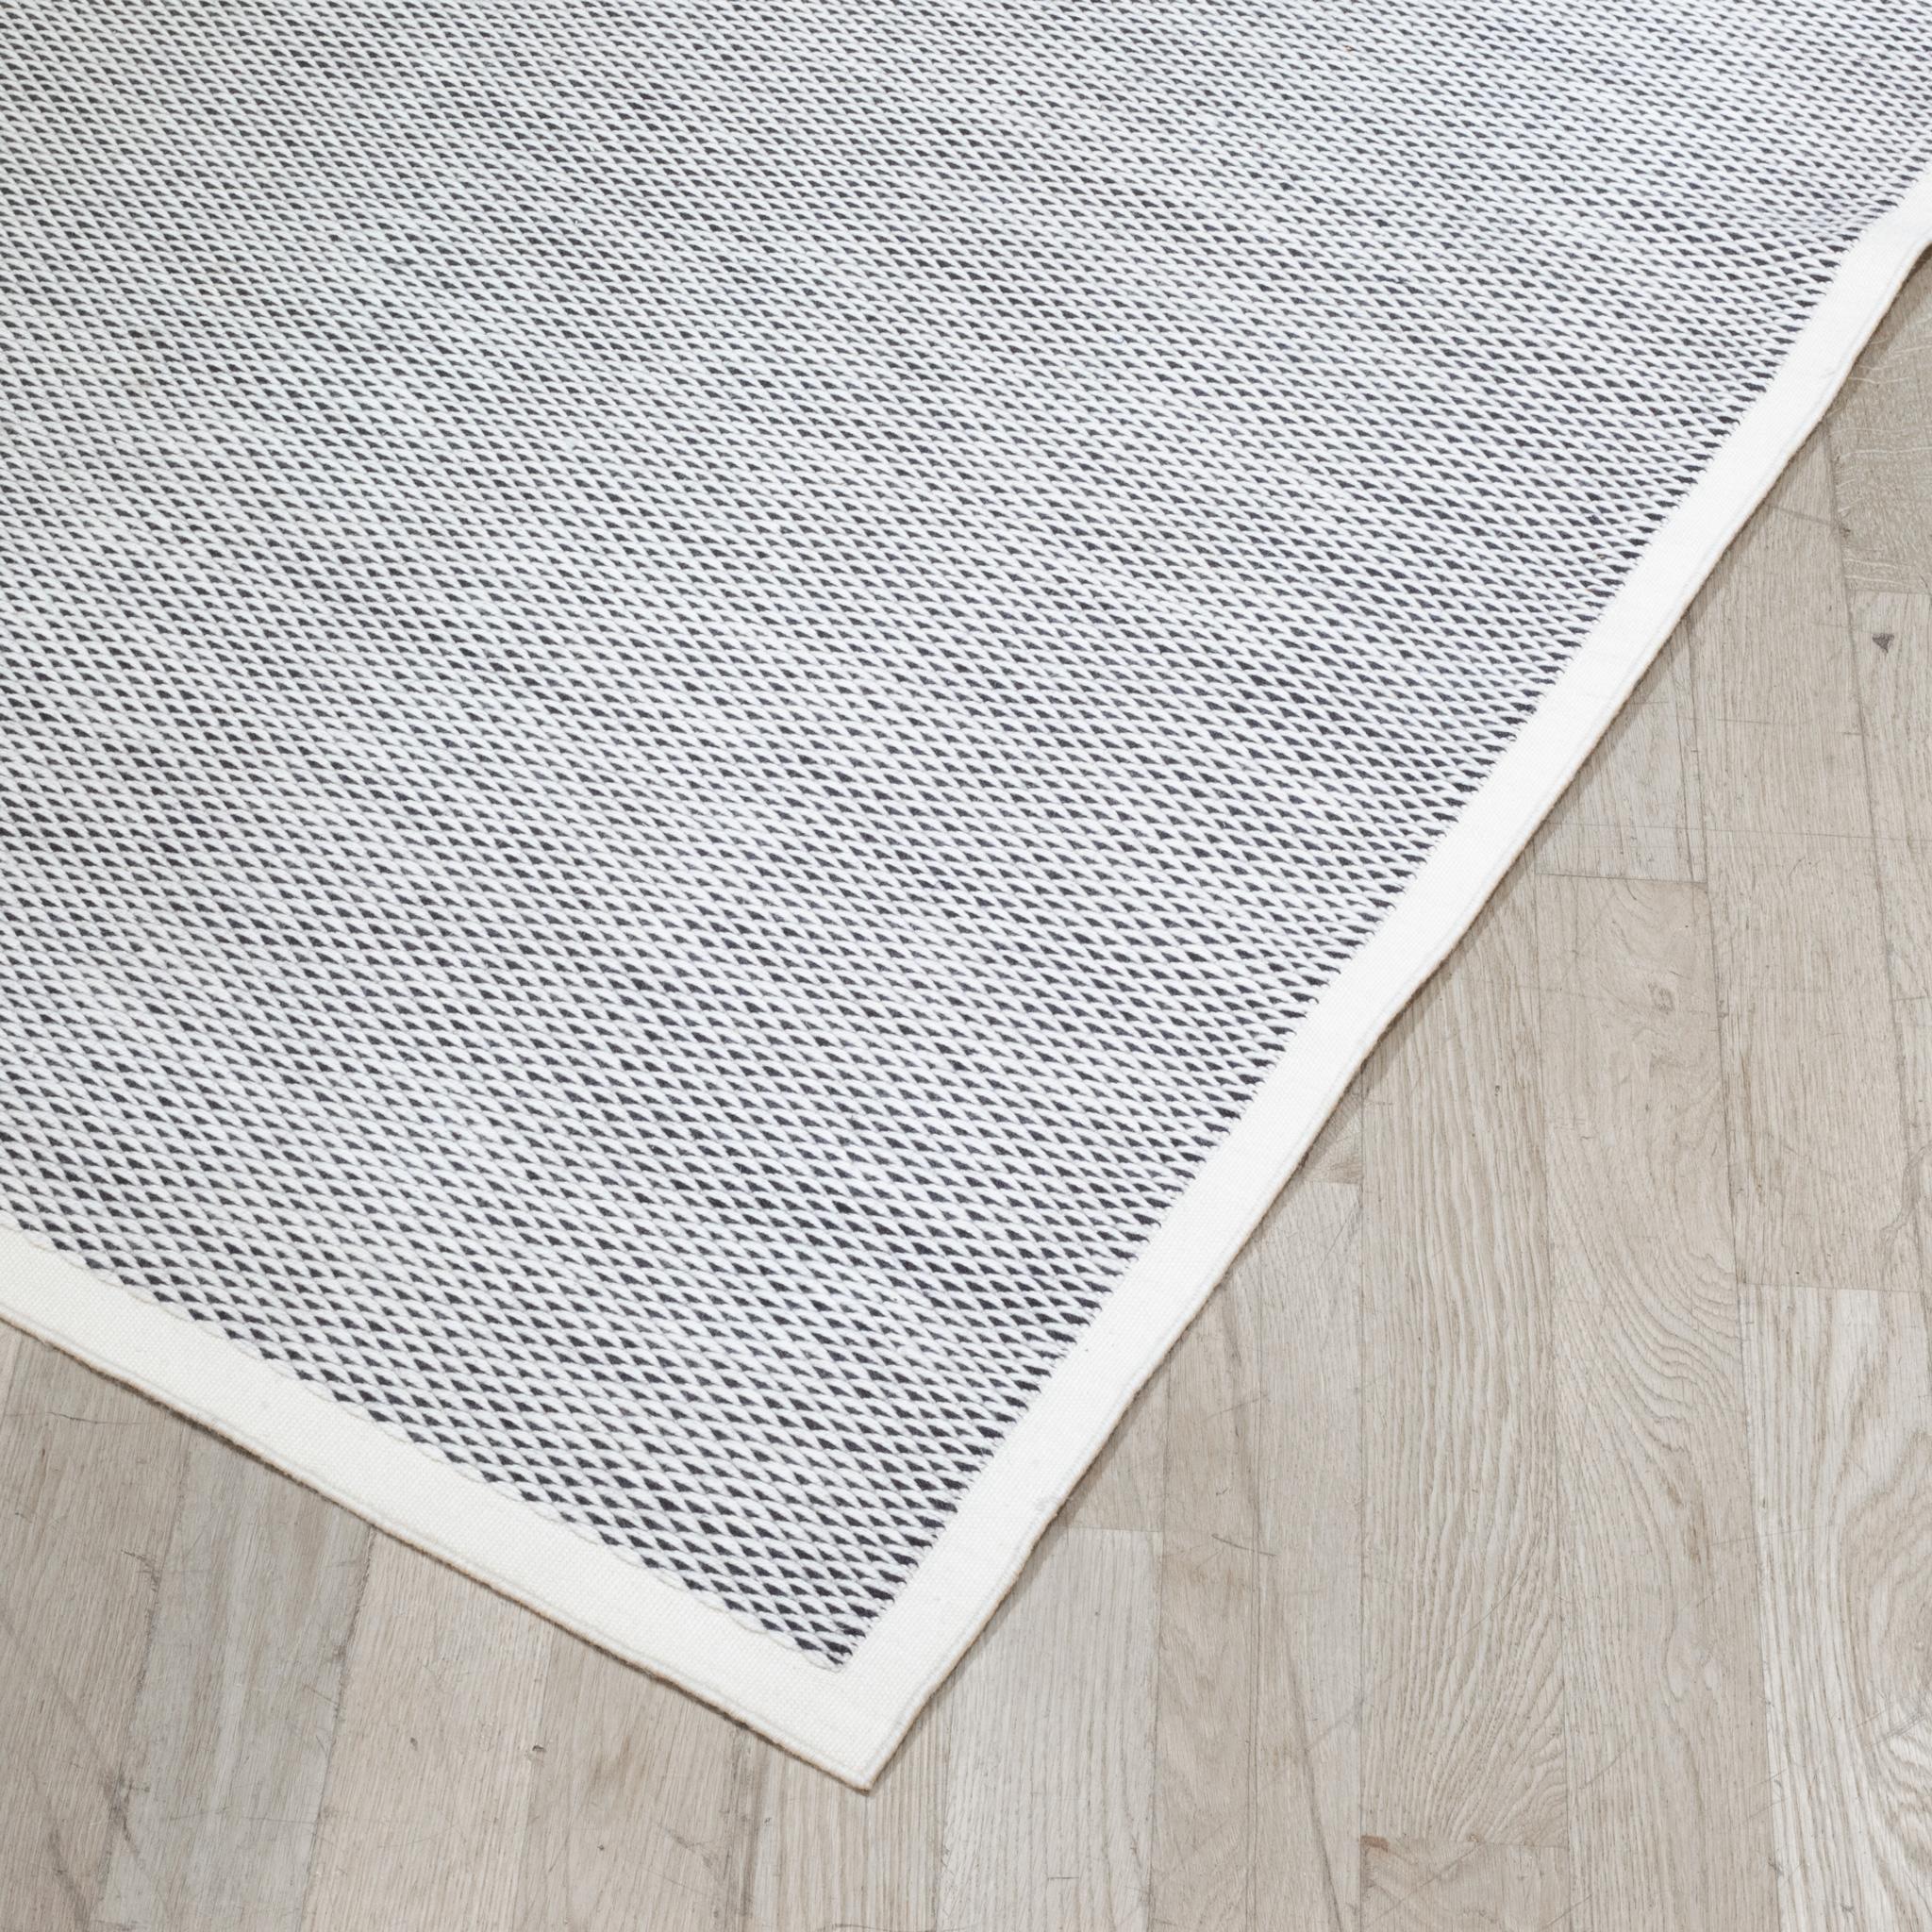 Modern 100% Merino Wool Lyxx Area Rug by Fells Andes 5' x 7' (FREE SHIPPING) For Sale